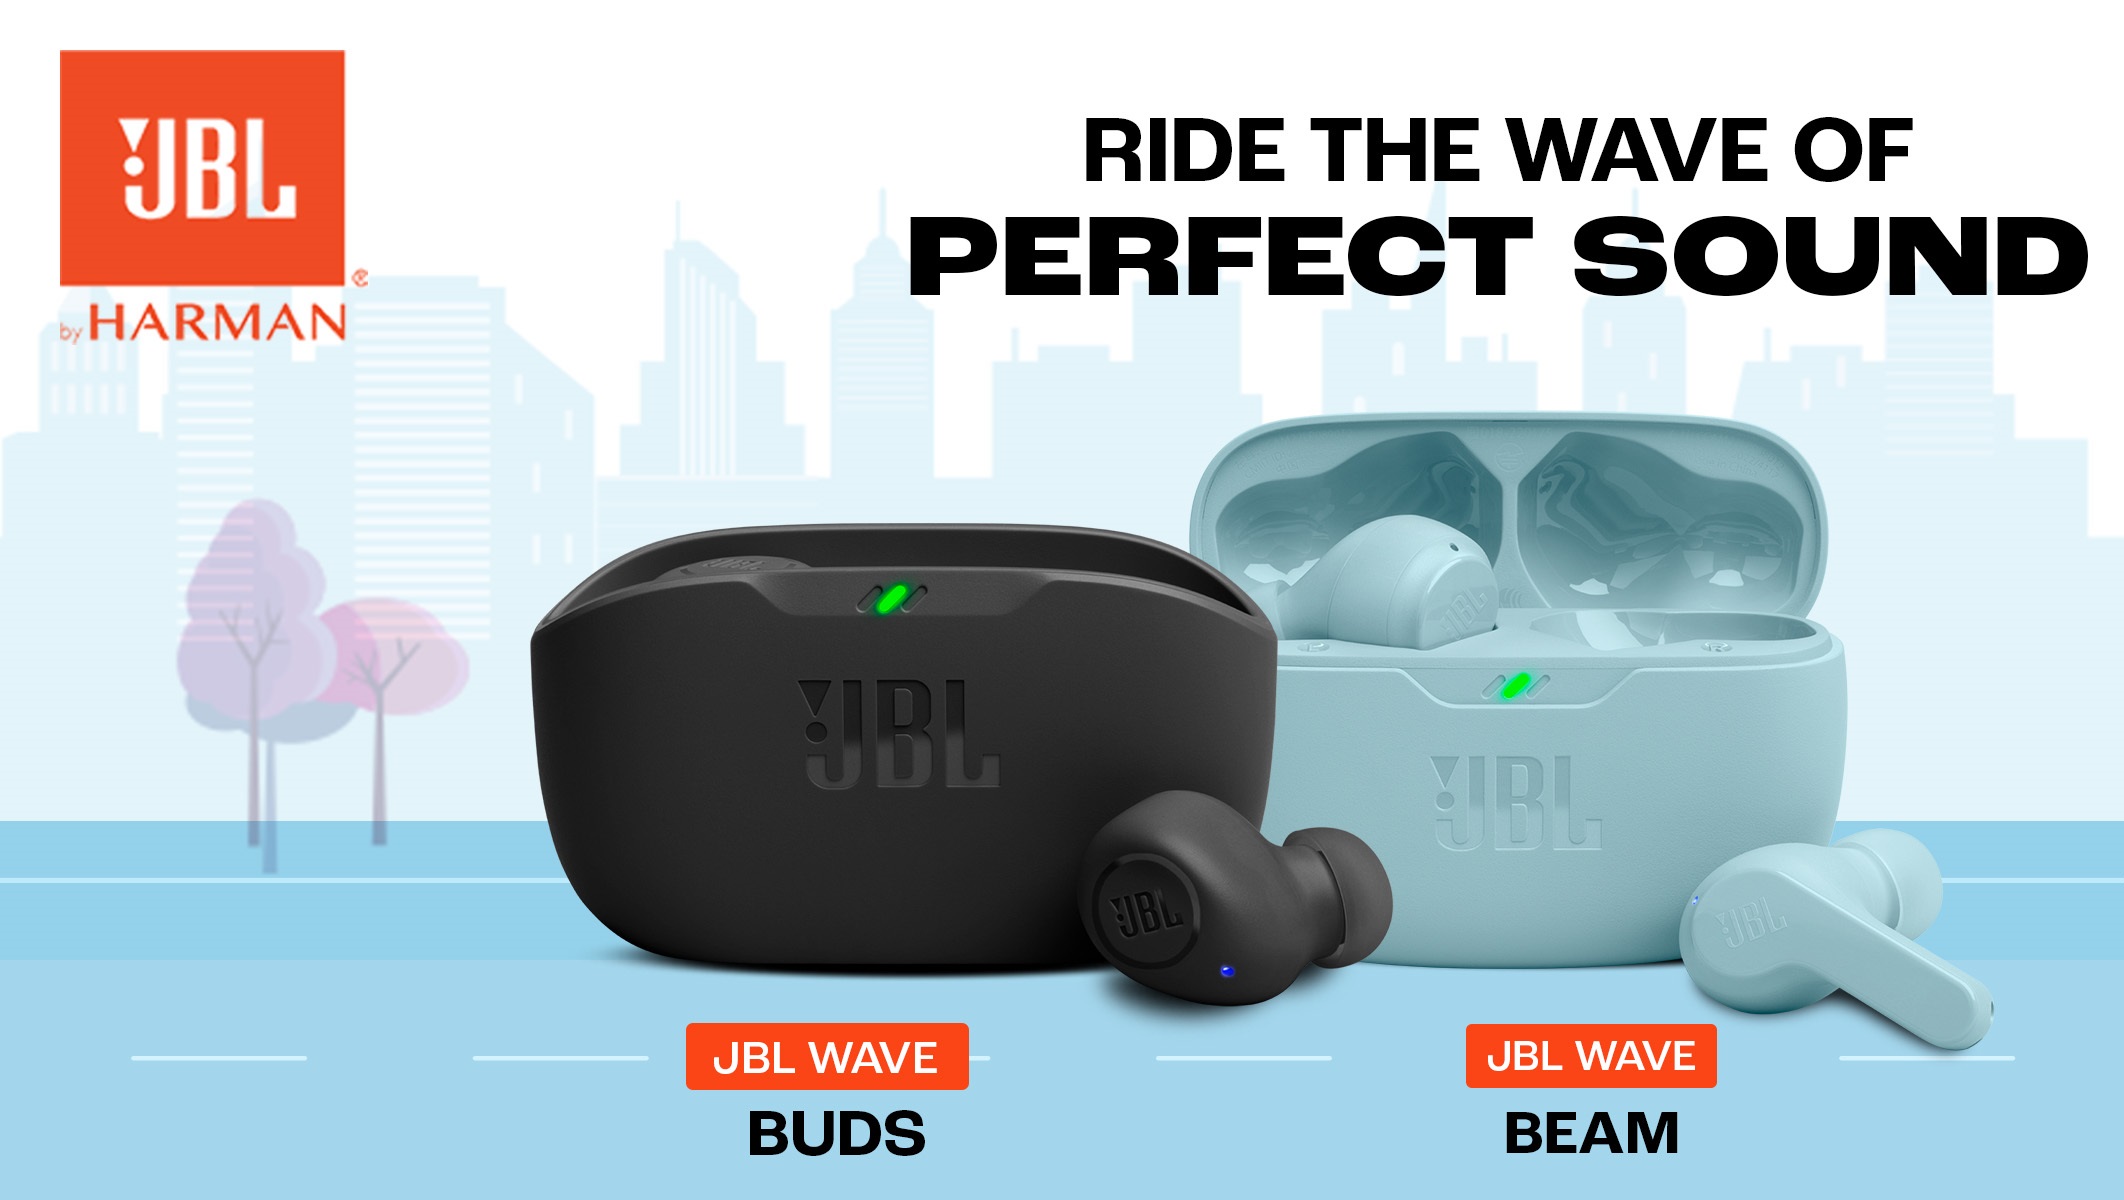 JBL Wave Buds and Wave Beam launched in India starting at an